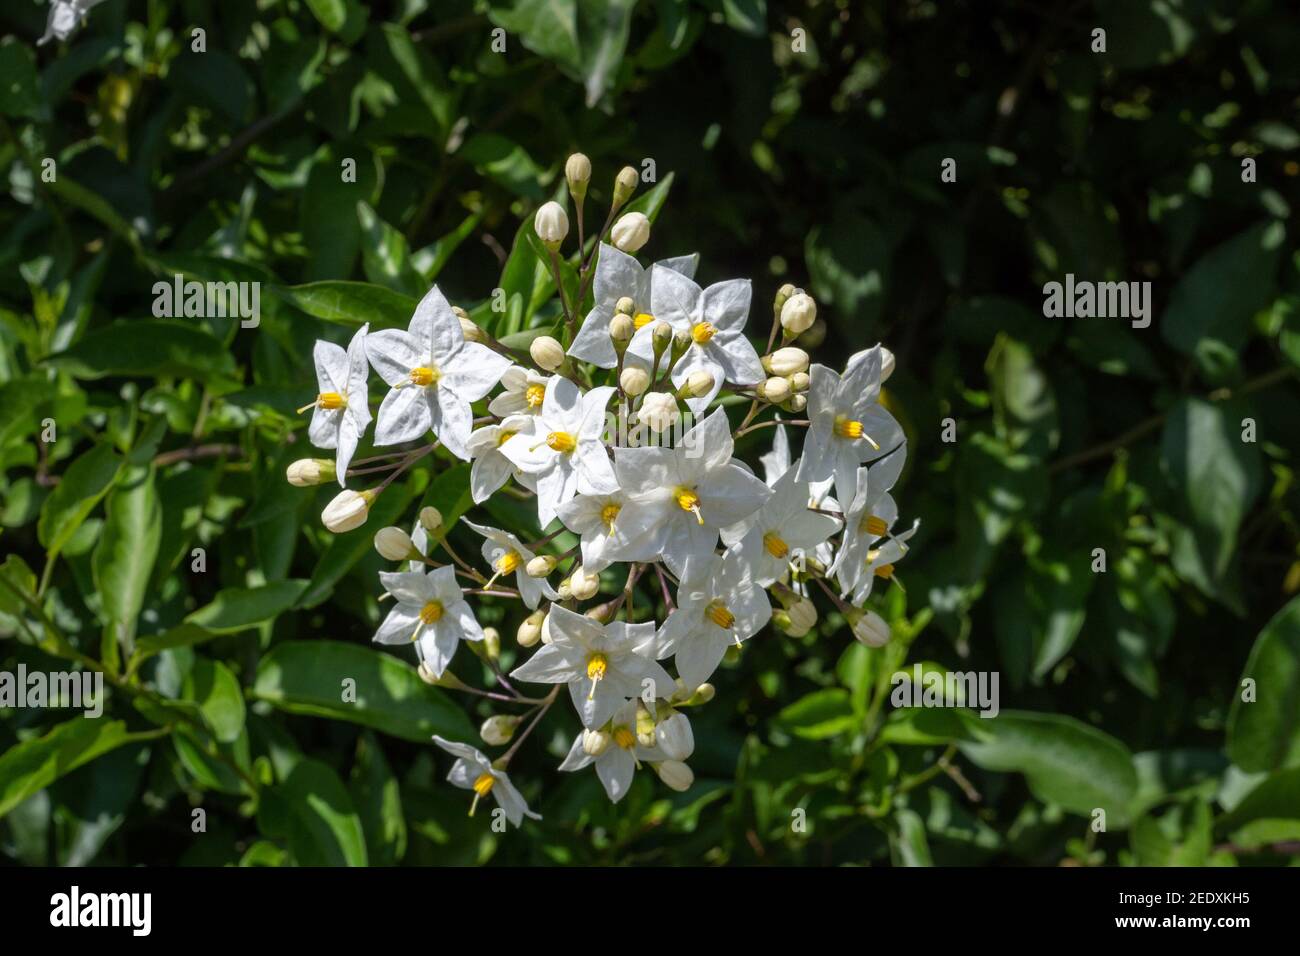 Crisp white star shaped flowers with yellow centres of the white potato vine, Solanum laxum 'Album' against a background of green leaves in summer sun Stock Photo